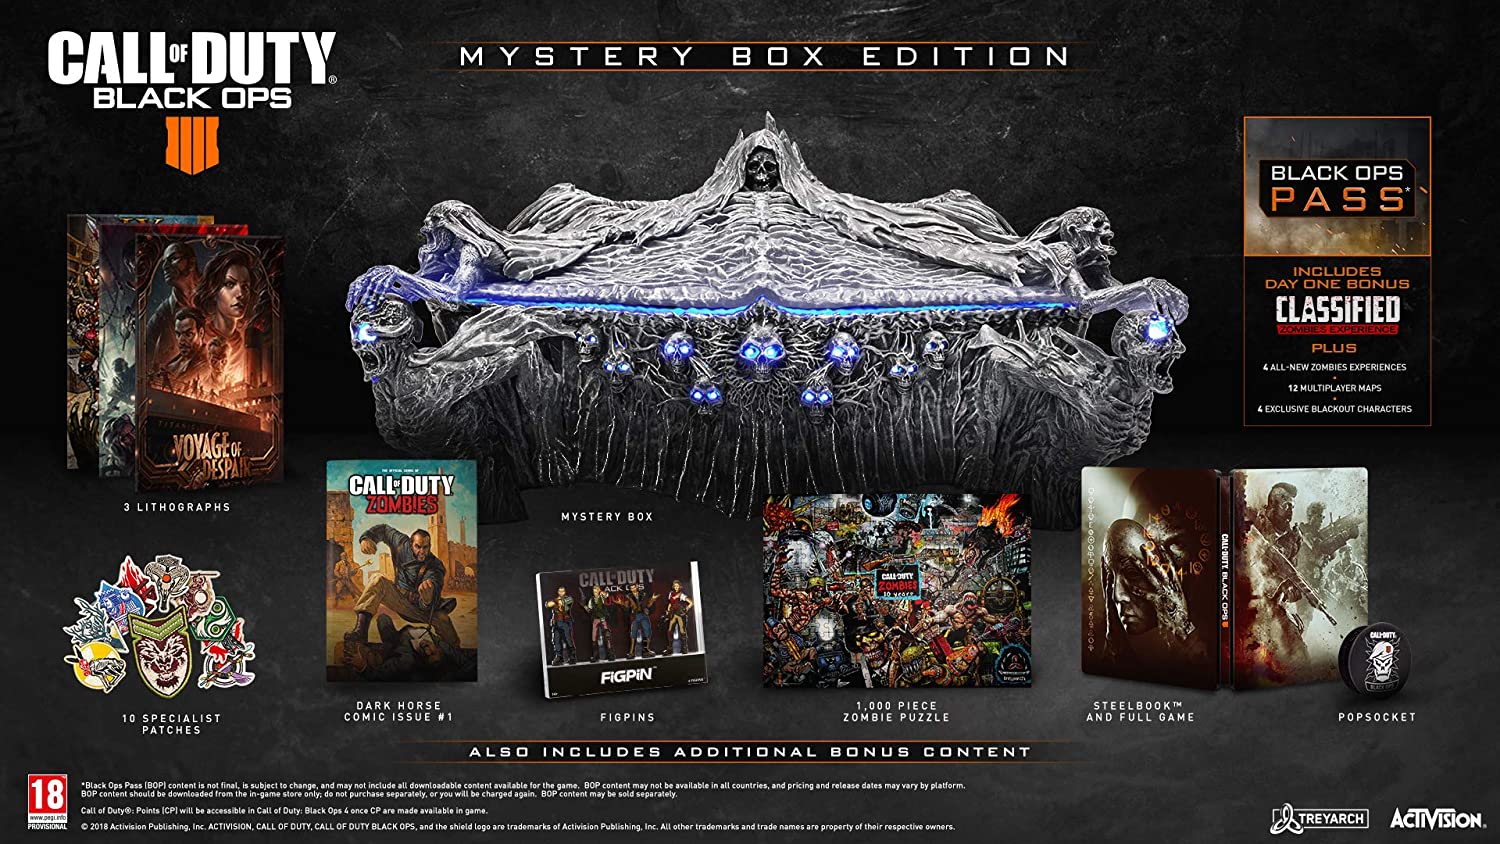 Call of Duty Black Ops 4 Mystery Box Edition